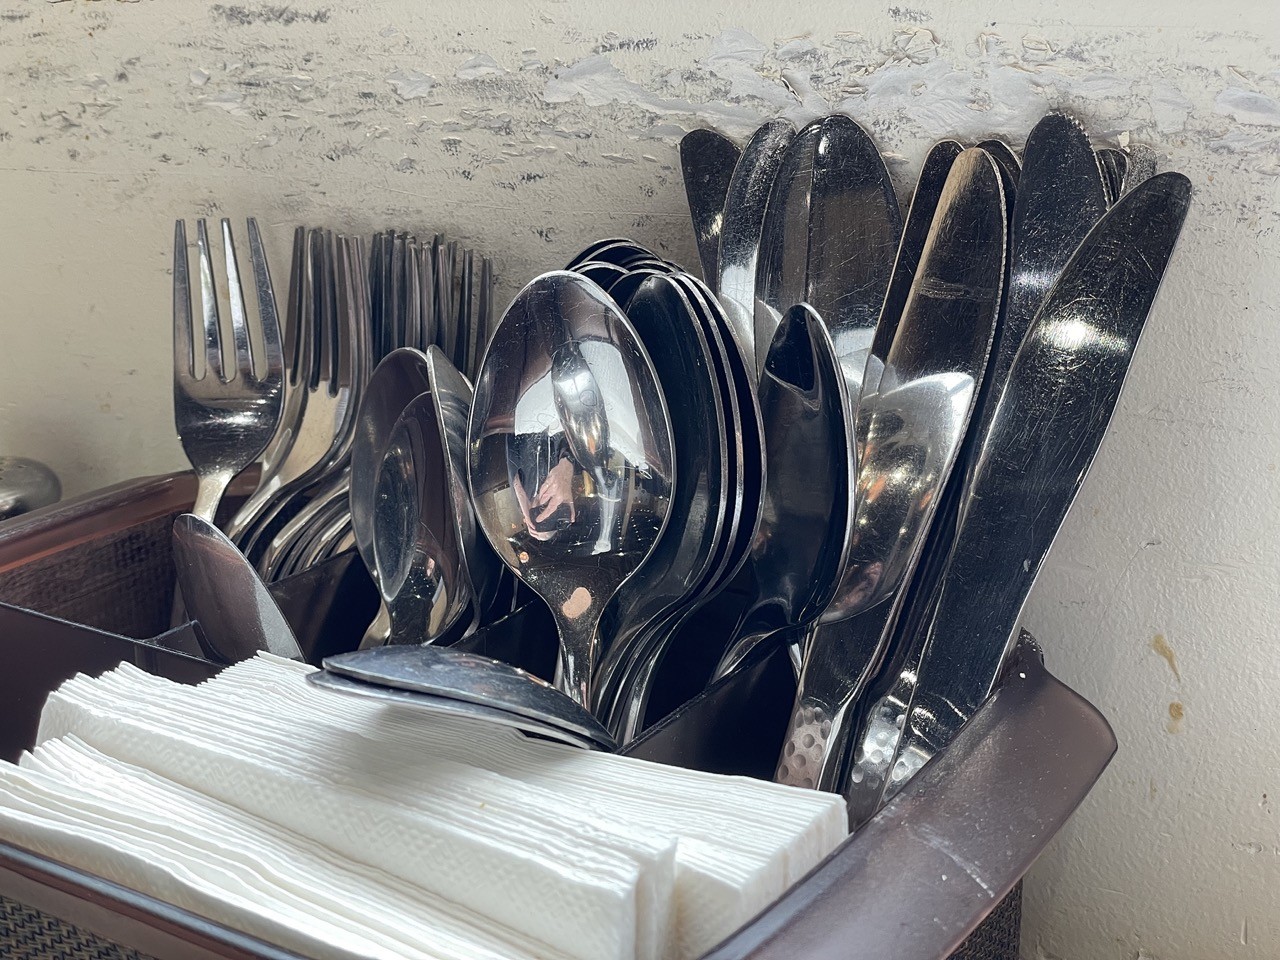 Select your own utensils from a box on the table and ... wait ... how do you get your fork and spoon out without touching the rest? We hope you washed your hands.